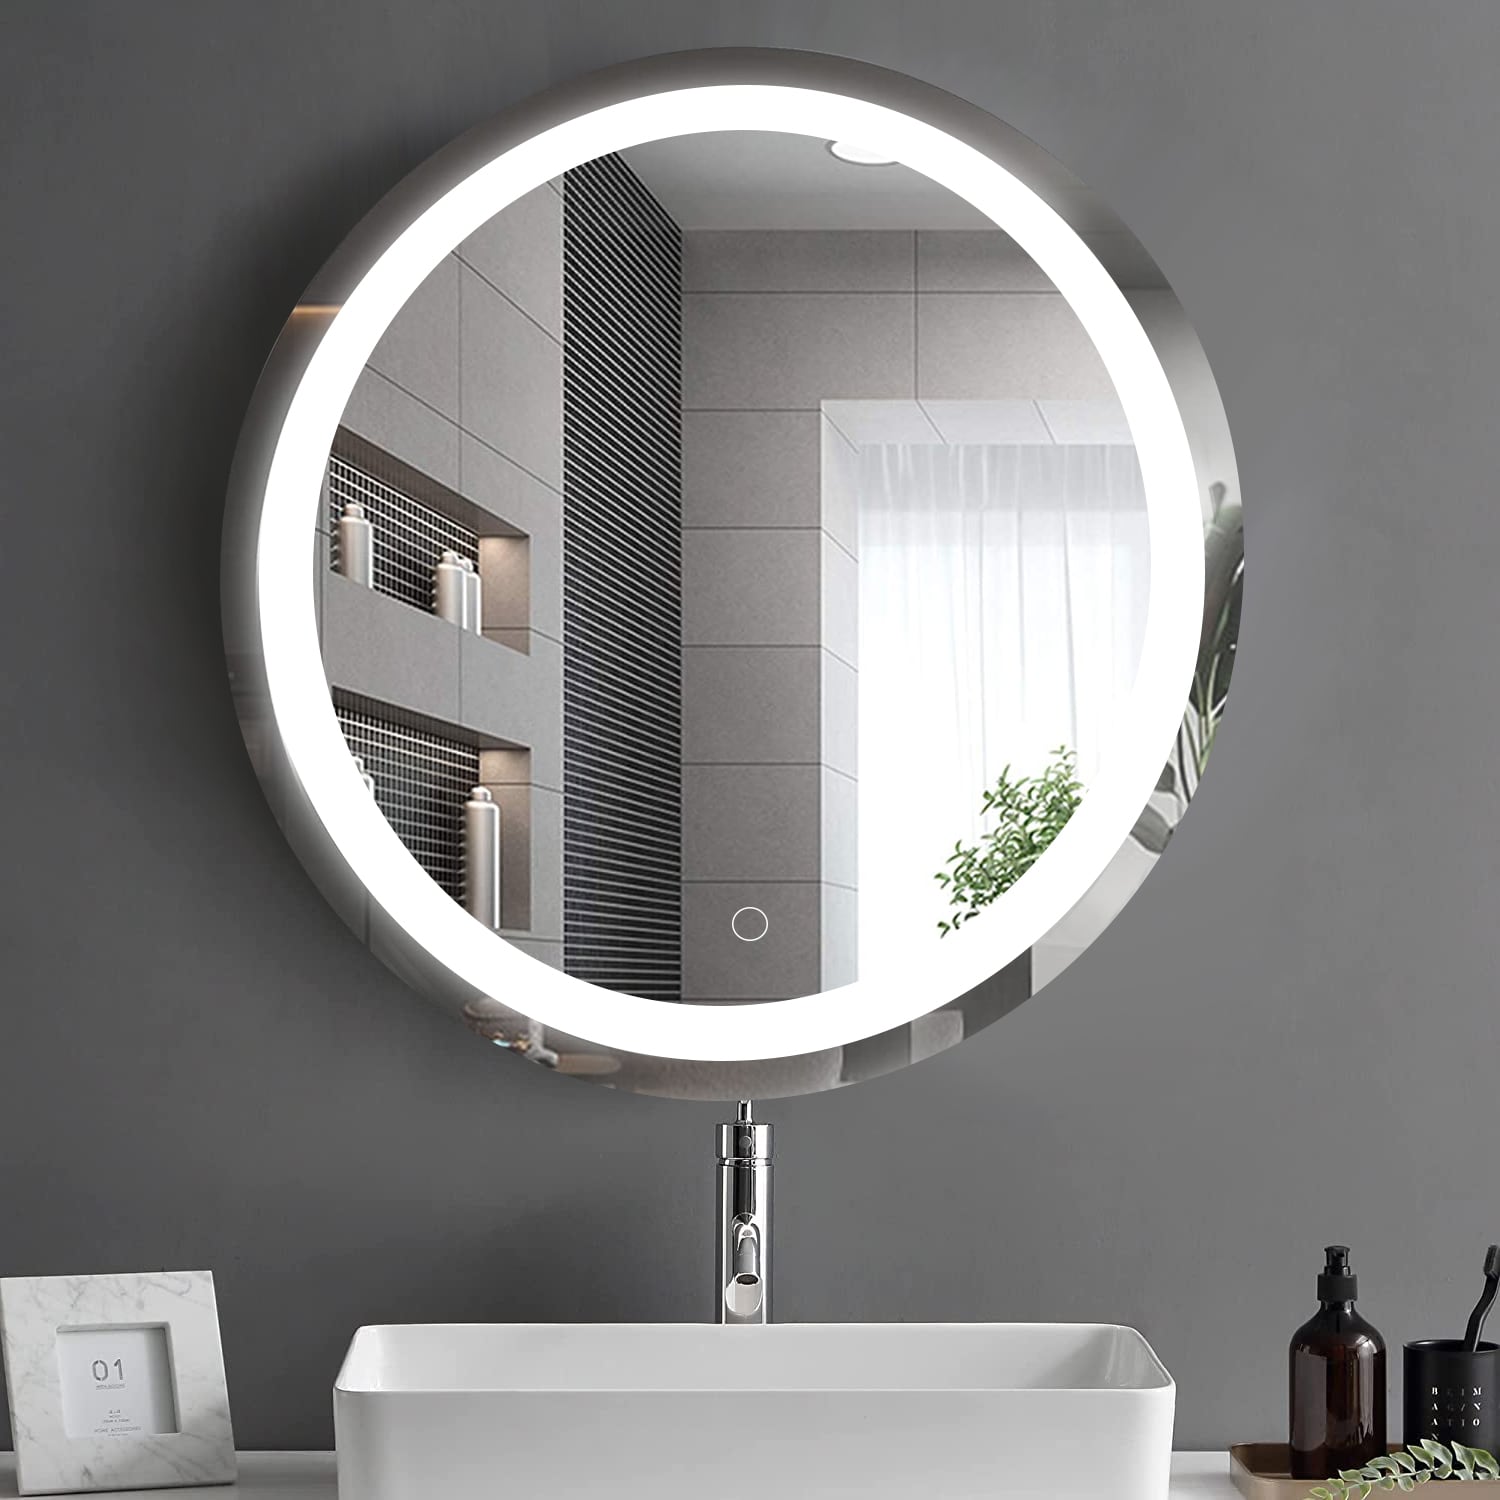 XL Dimmable LED Strip Makeup Mirror with Smart Touch Control – 72